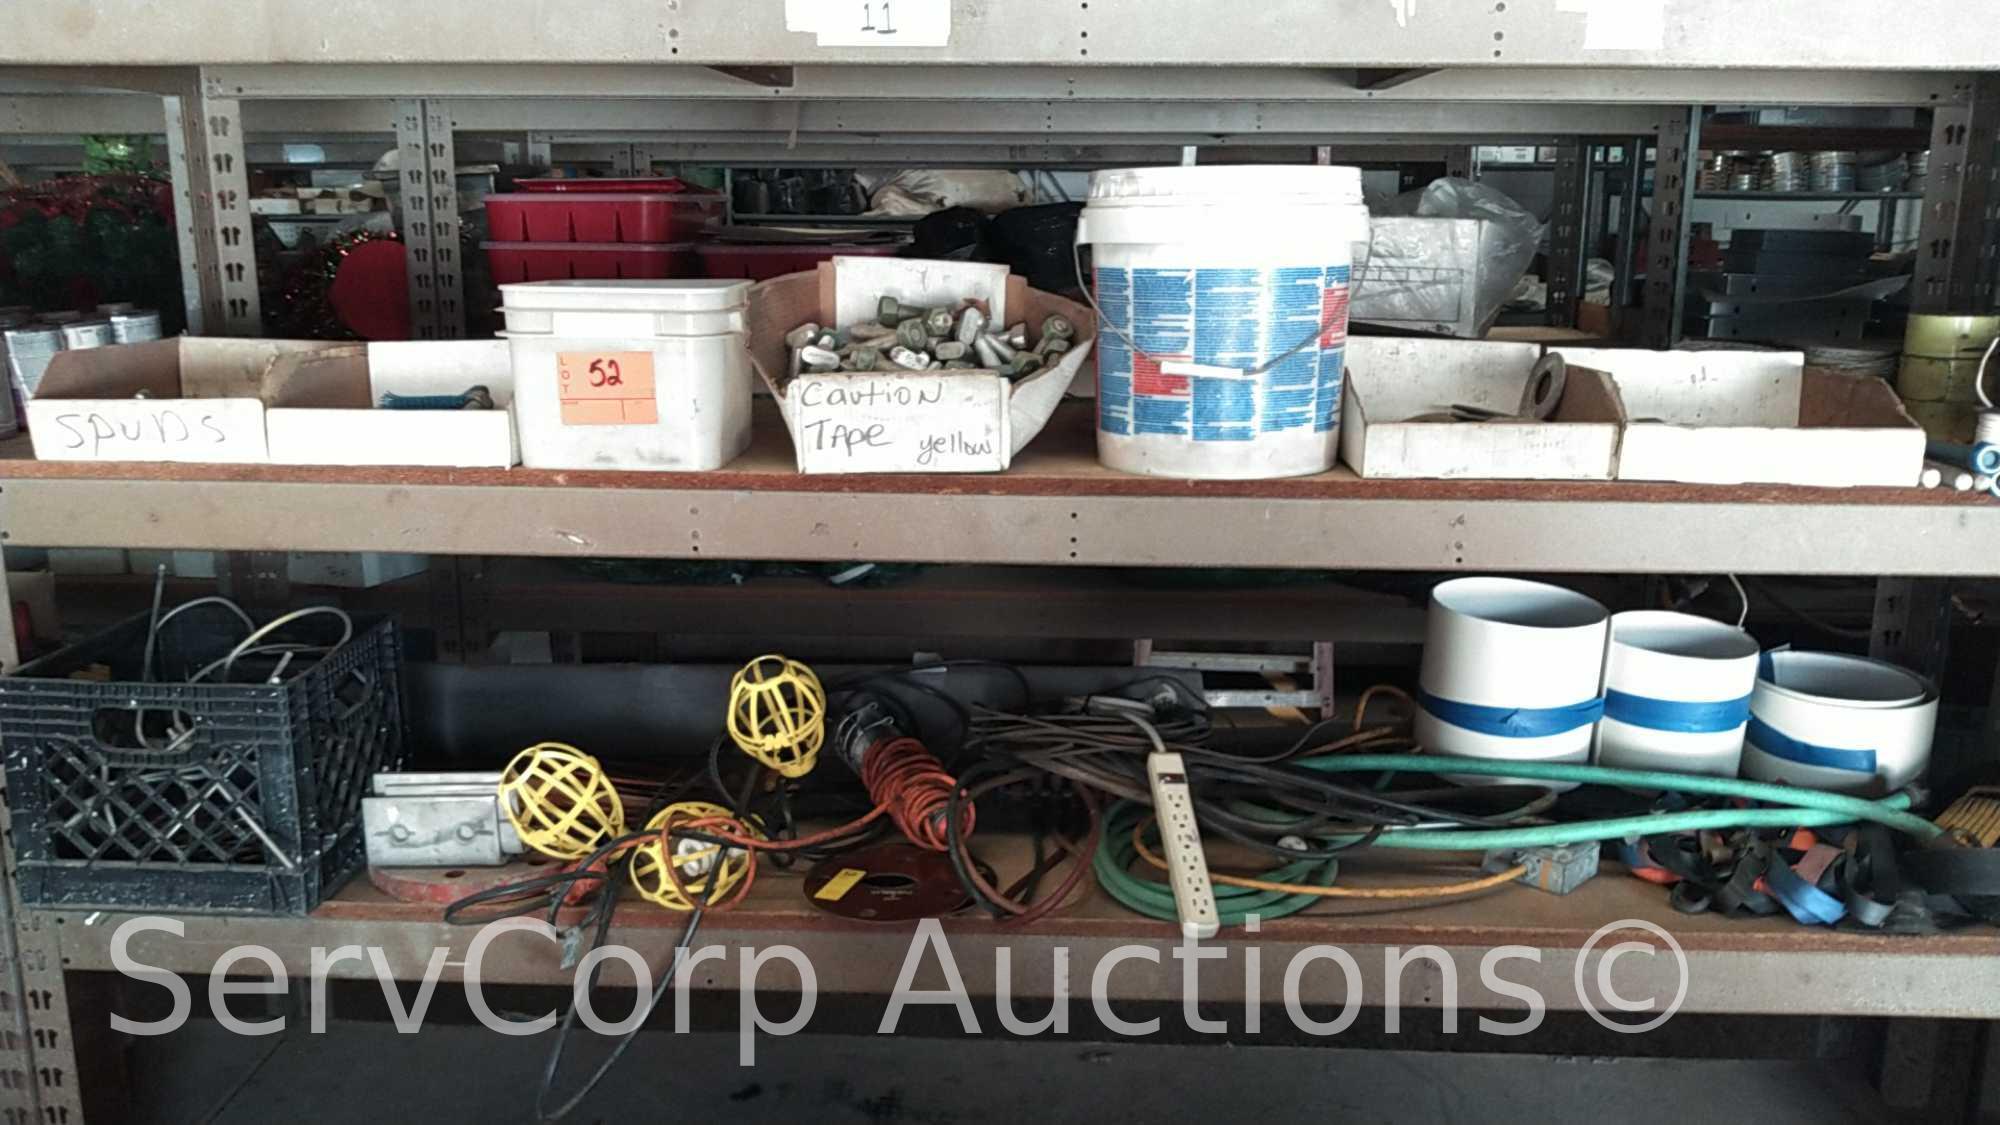 Lot on 2 Shelves of Various Nuts, Bolts, Washers, Hard Gaskets, Straps, Electrical Wire, Rope Light,